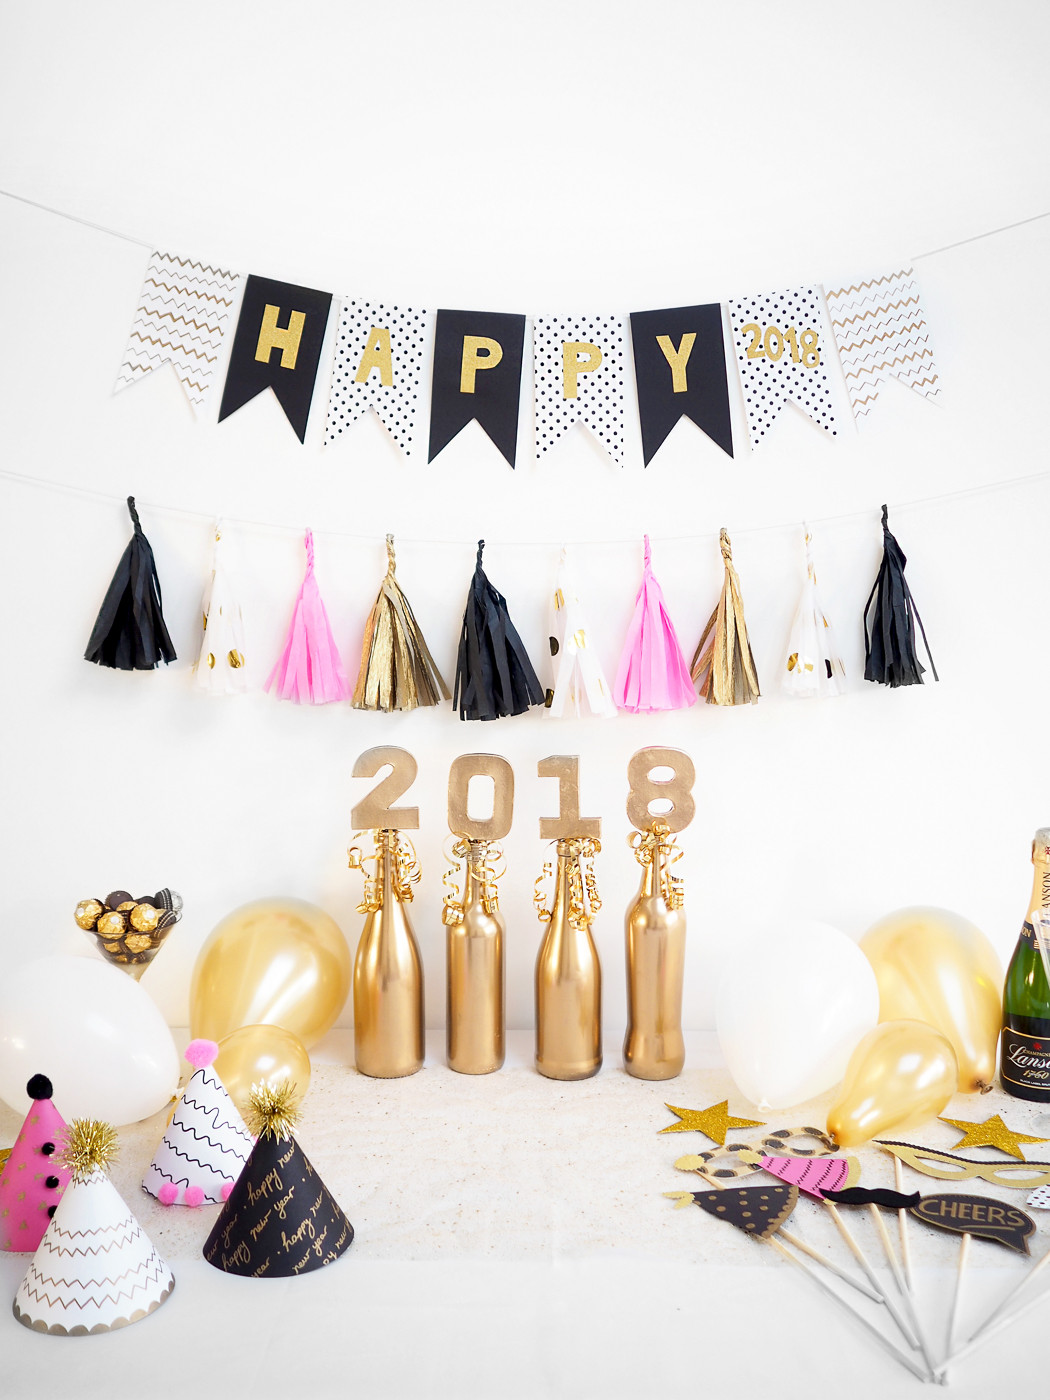 DIY New Years Eve Decorations
 DIY New Years Eve Decorations Pink & Gold Bang on Style